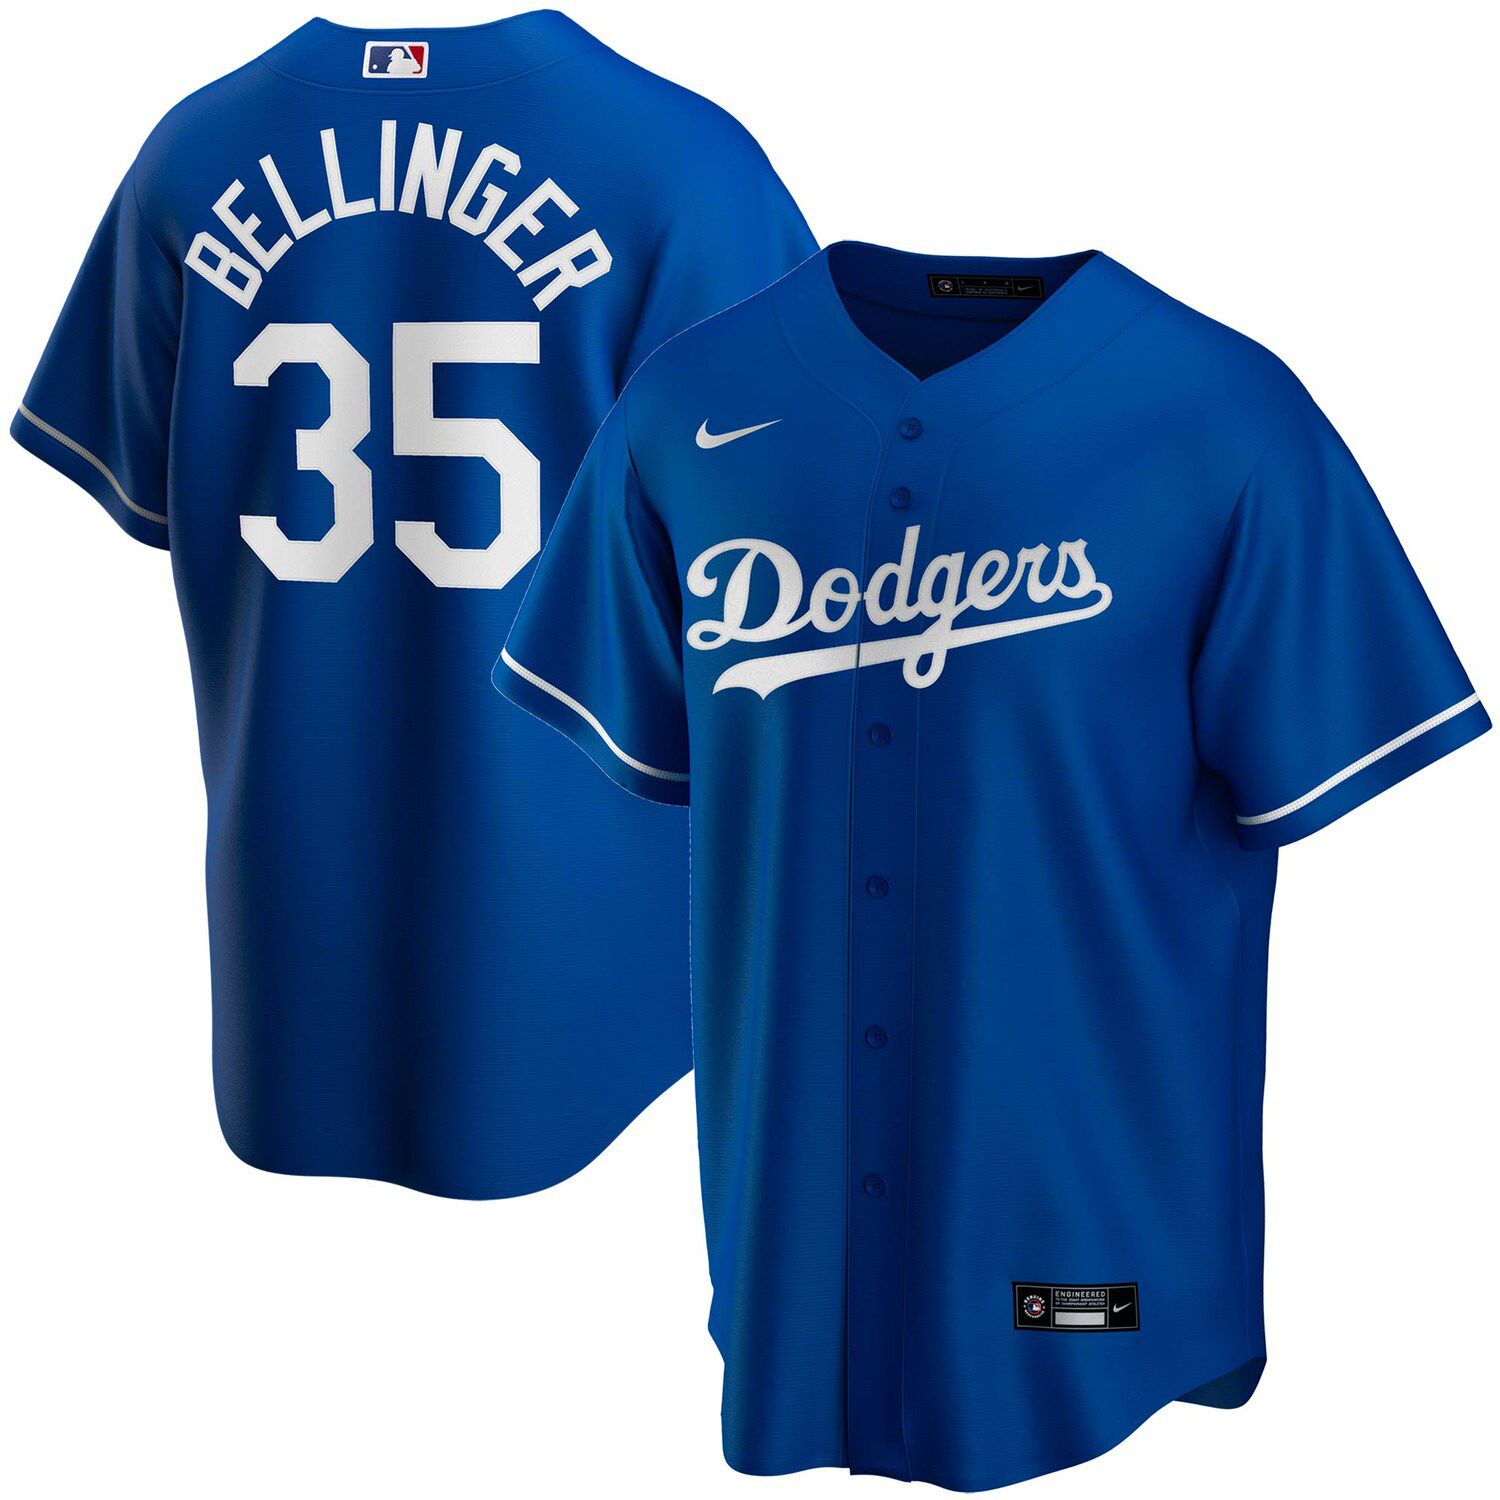 cody bellinger youth jersey